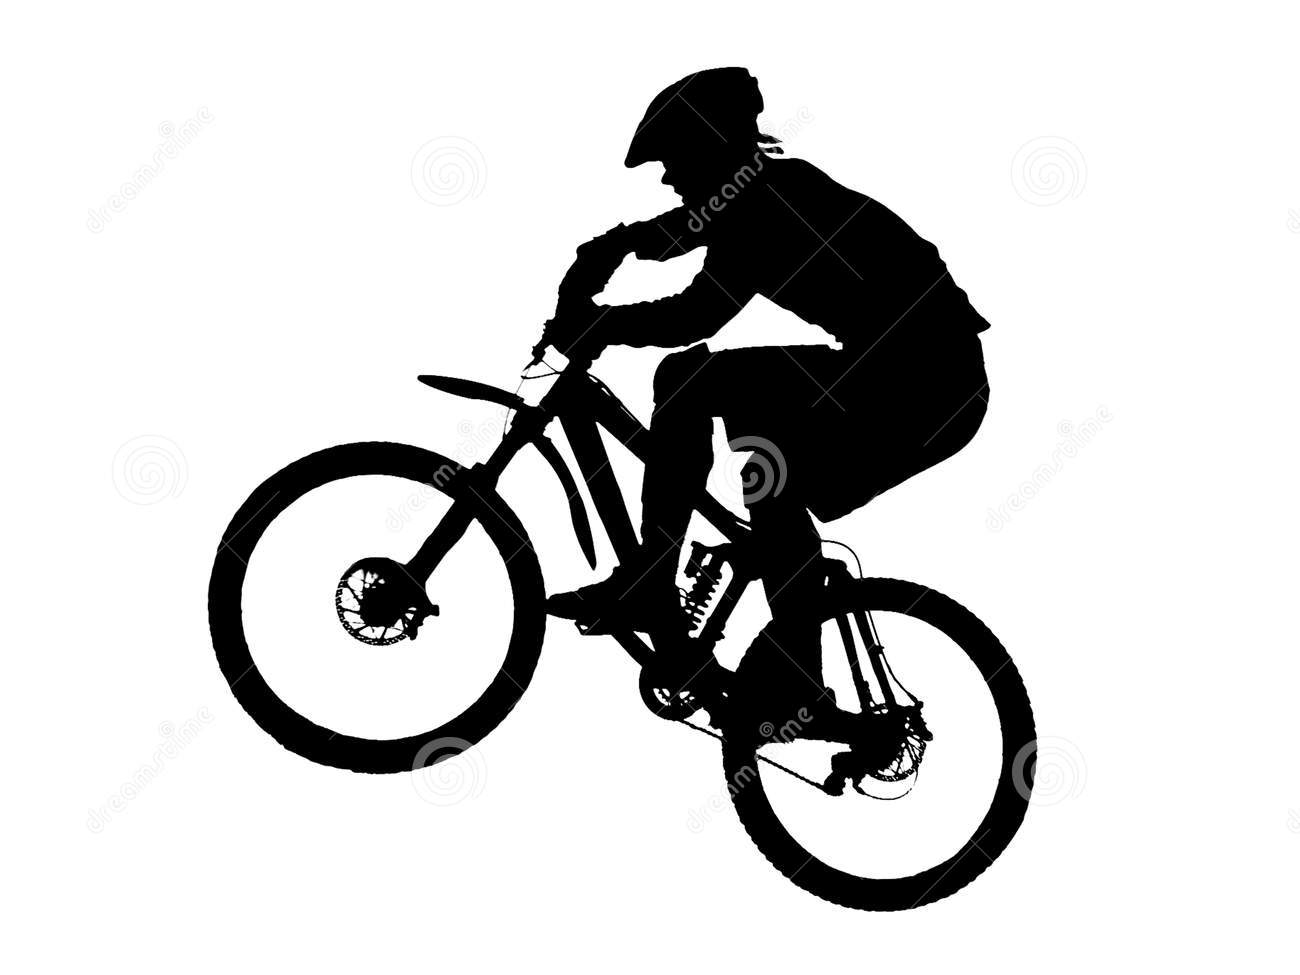 Bicycle clipart for silhouette